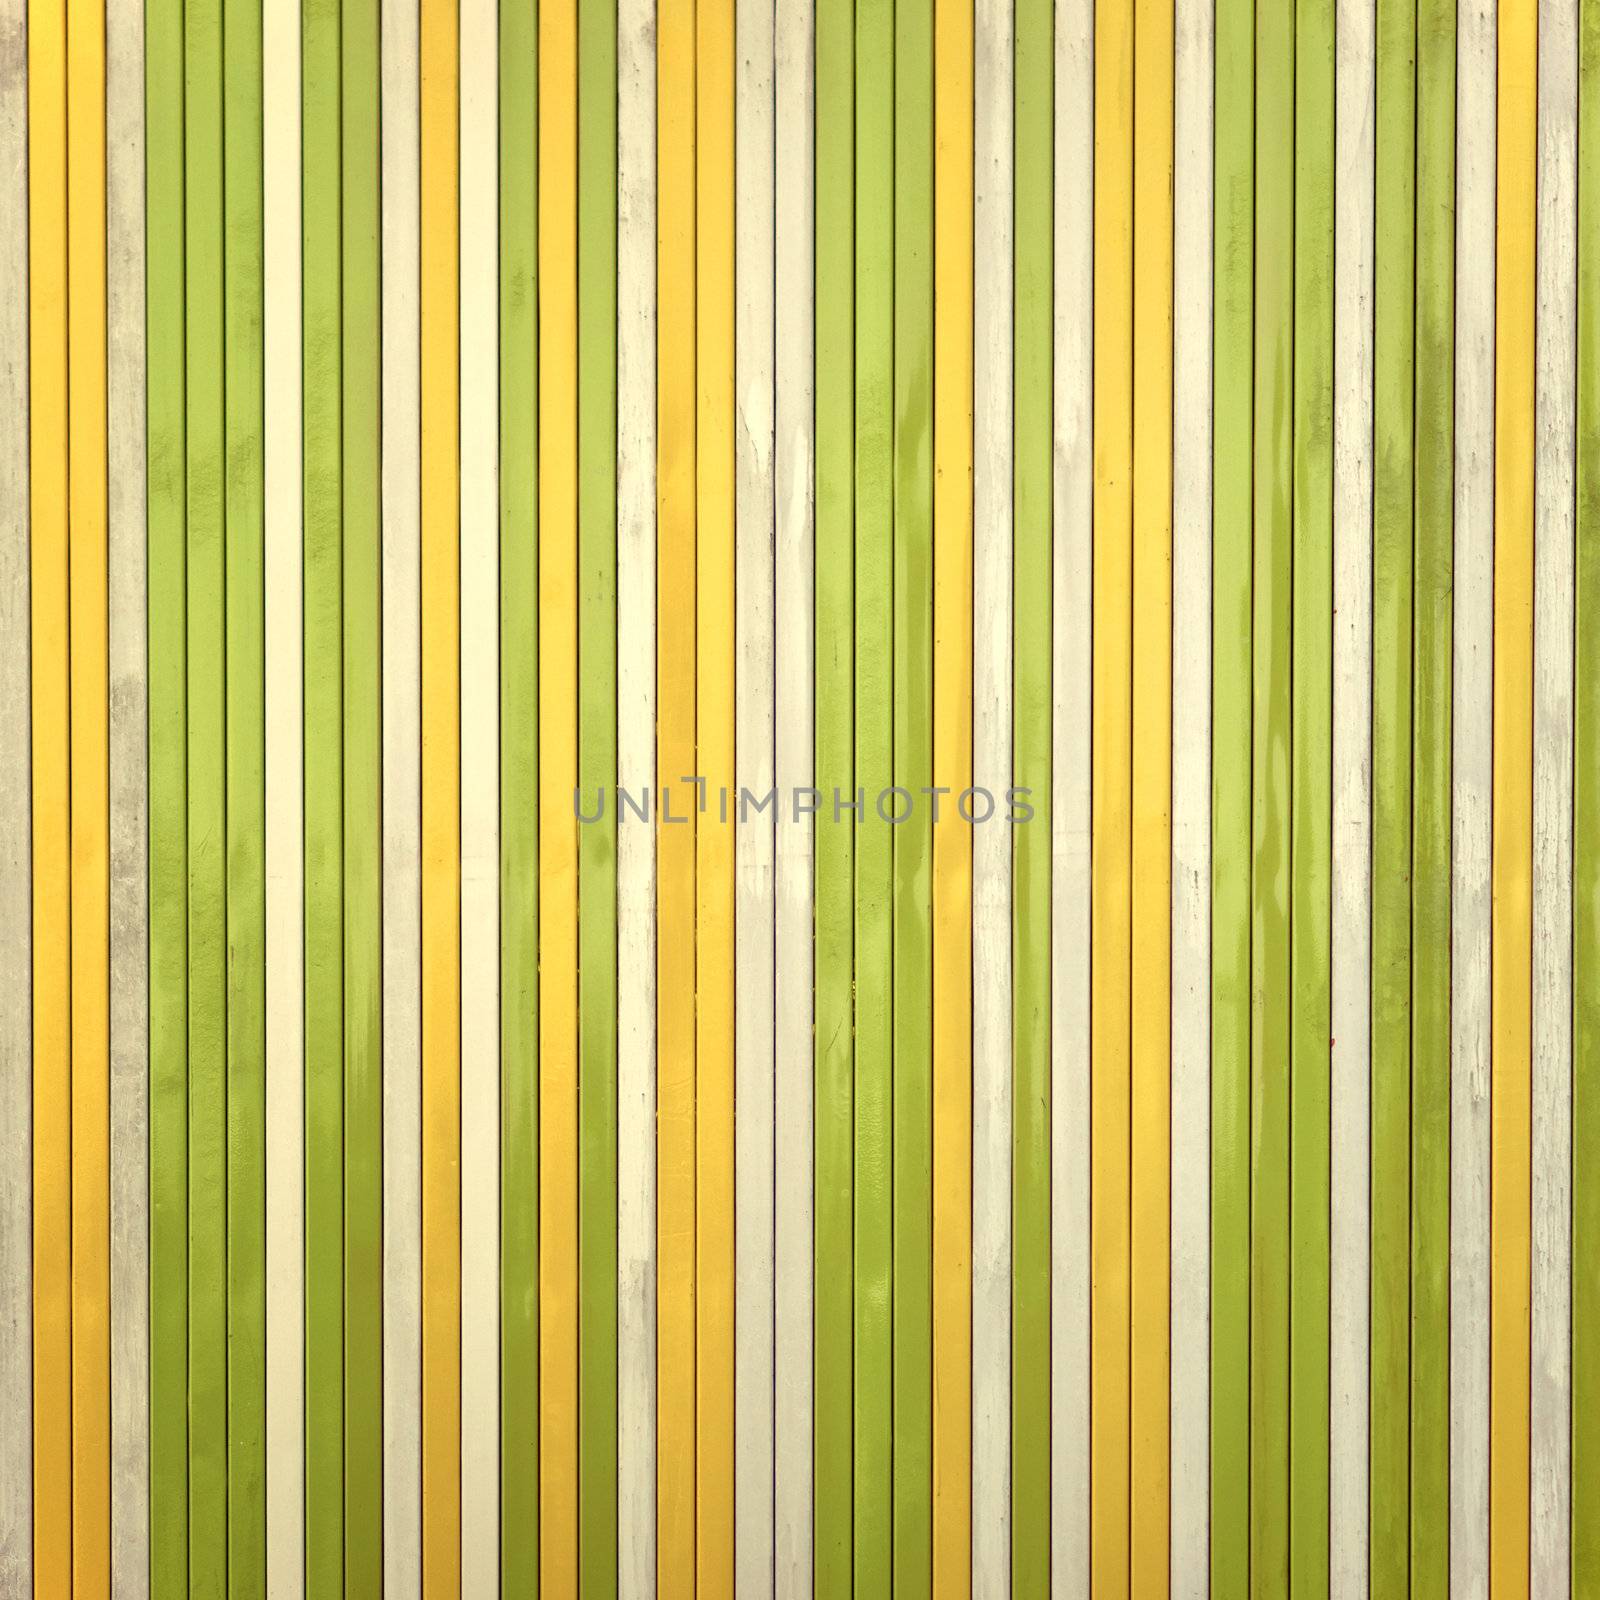 Flat striped surface by timbrk